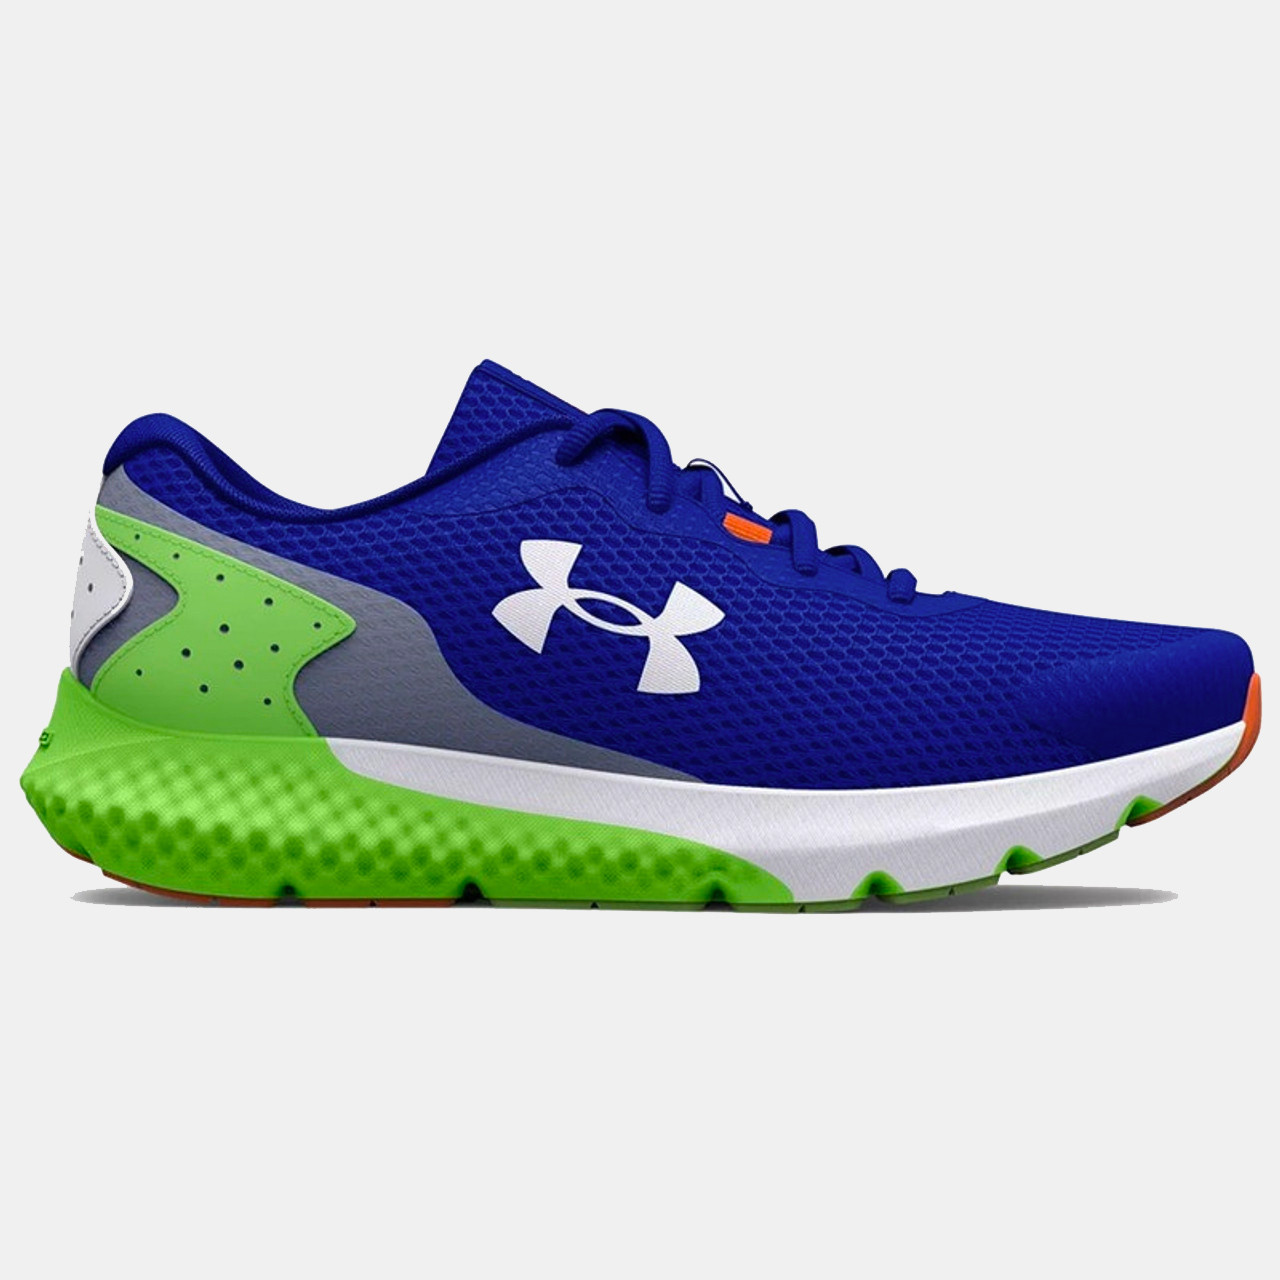 Under Armour Charged Rogue 2, review and details